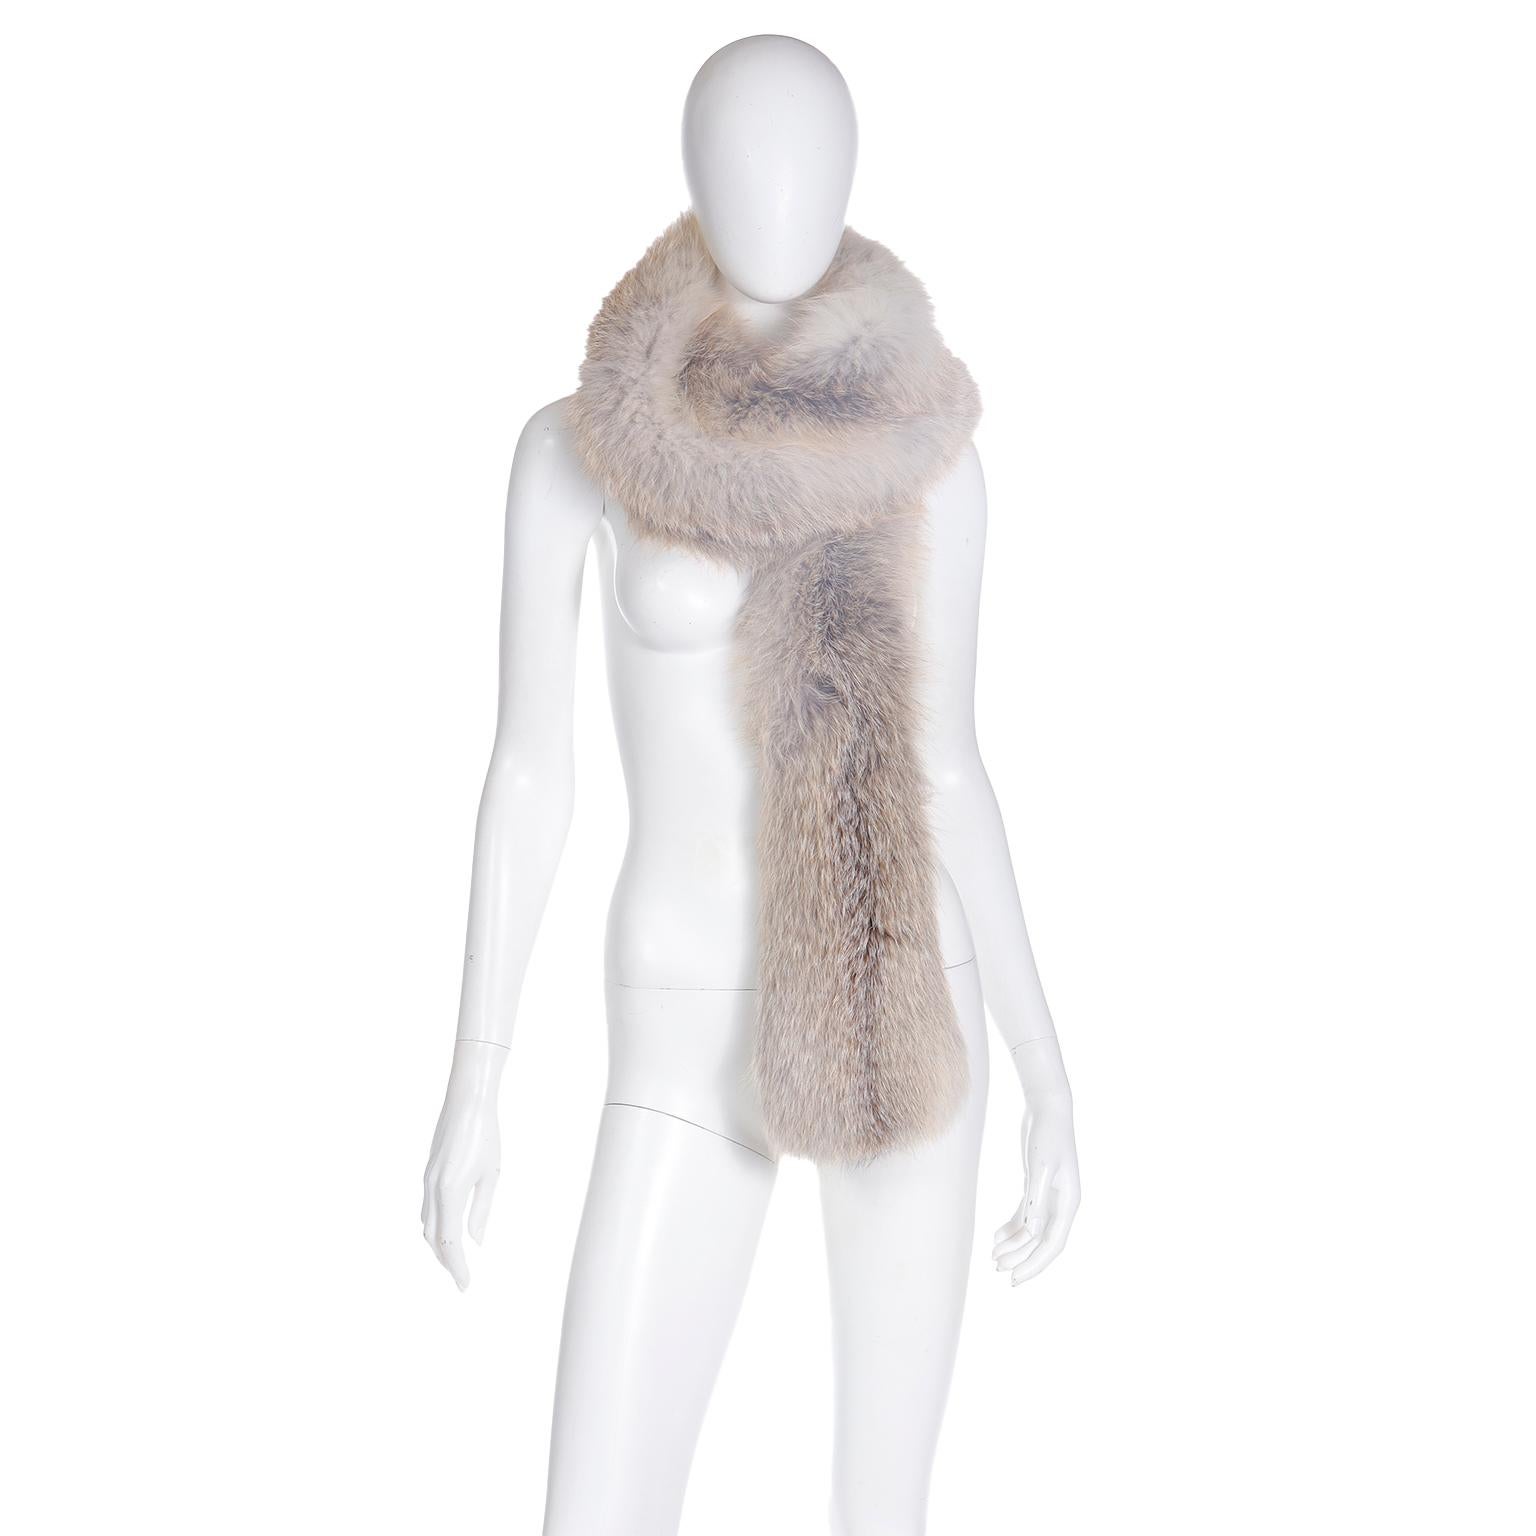 This luxurious fox fur boa style wrap is perfect for those cold Fall and Winter evenings. The fur is in soft natural shades of cream, grey and ivory and it is soft and supple. This extra long wrap can be doubled and worn around the neck or draped